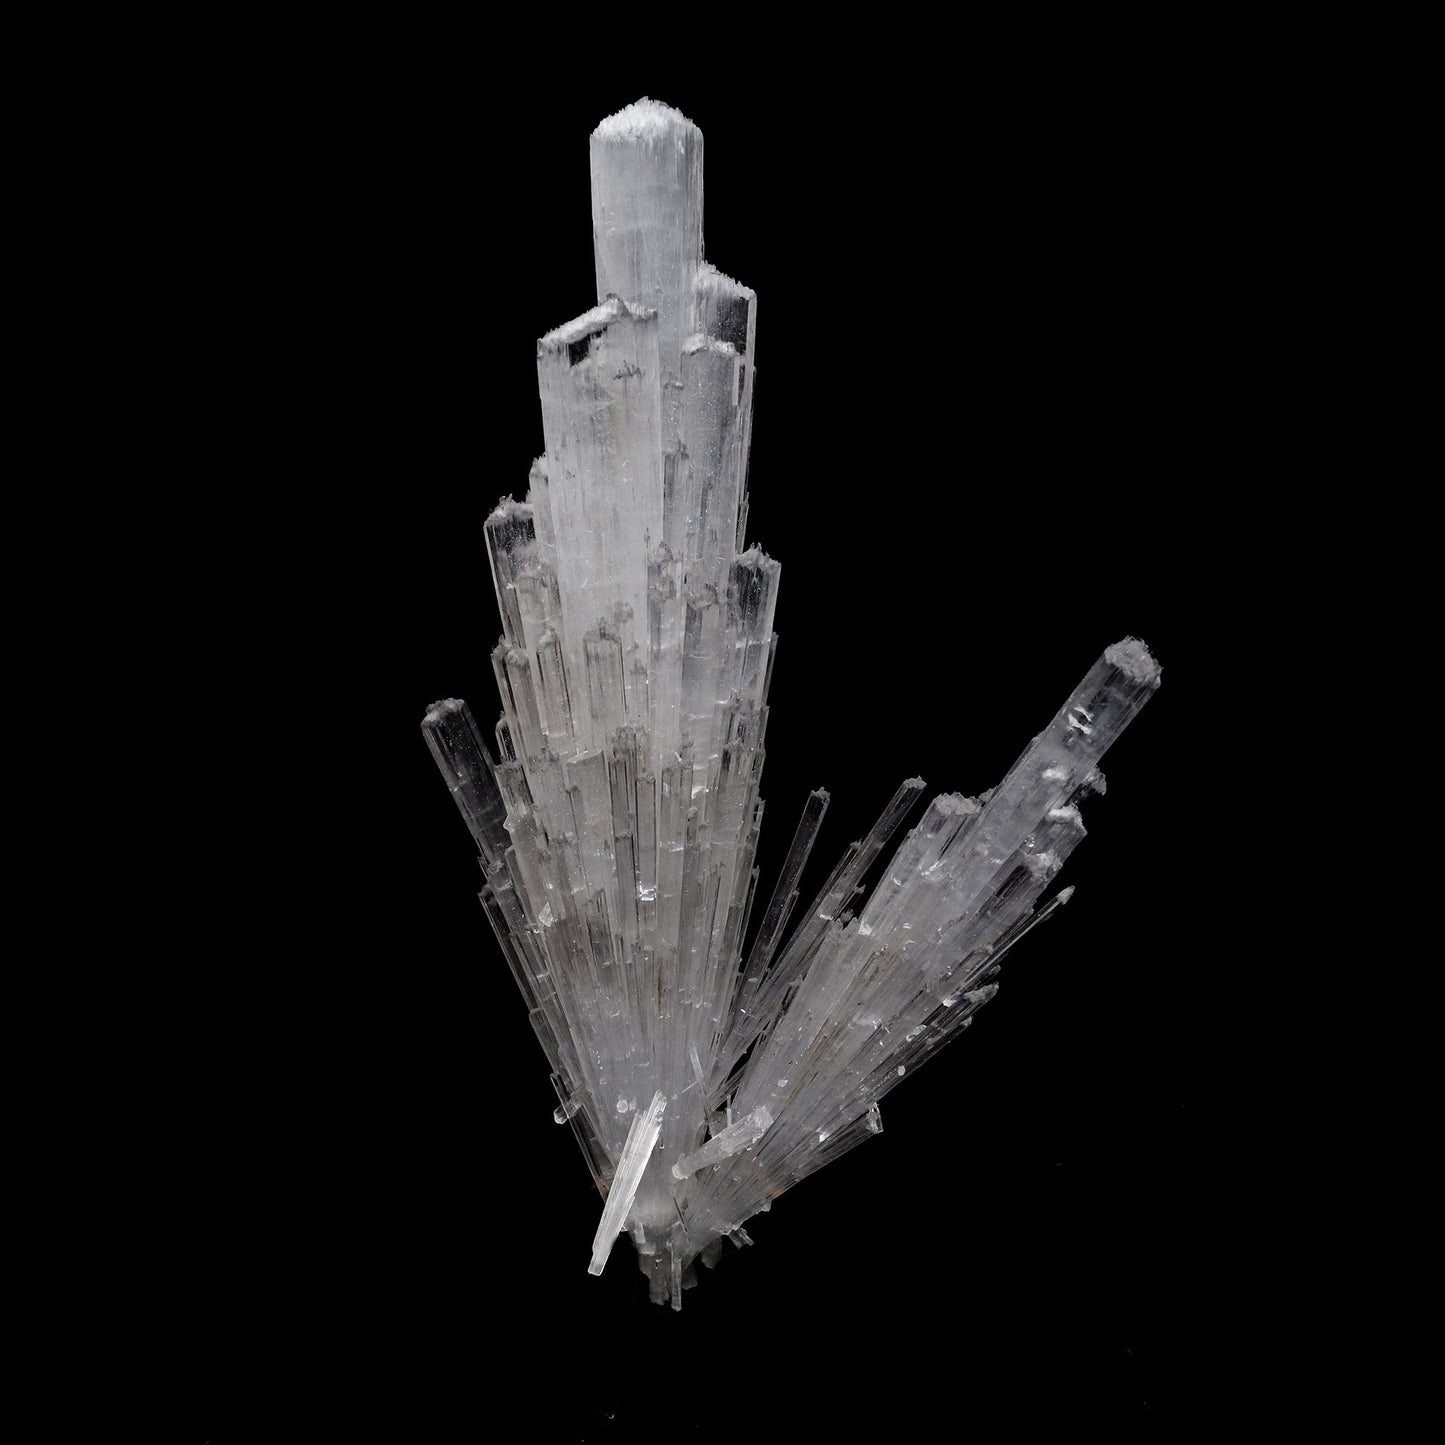 Scolecite Spray Formation Natural Mineral Specimen # B 5275  https://www.superbminerals.us/products/scolecite-spray-formation-natural-mineral-specimen-b-5275  Features: This specimen features a large, radial formation of colorless, transparent, lustrous acicular Scolecite crystals on peach-colored Stilbite. Primary Mineral(s): Scolecite Secondary Mineral(s): N/AMatrix: N/A 7 Inch x 4 InchWeight : 200 GmsLocality: Aurangabad, Maharashtra, India Year of Discovery: 2021